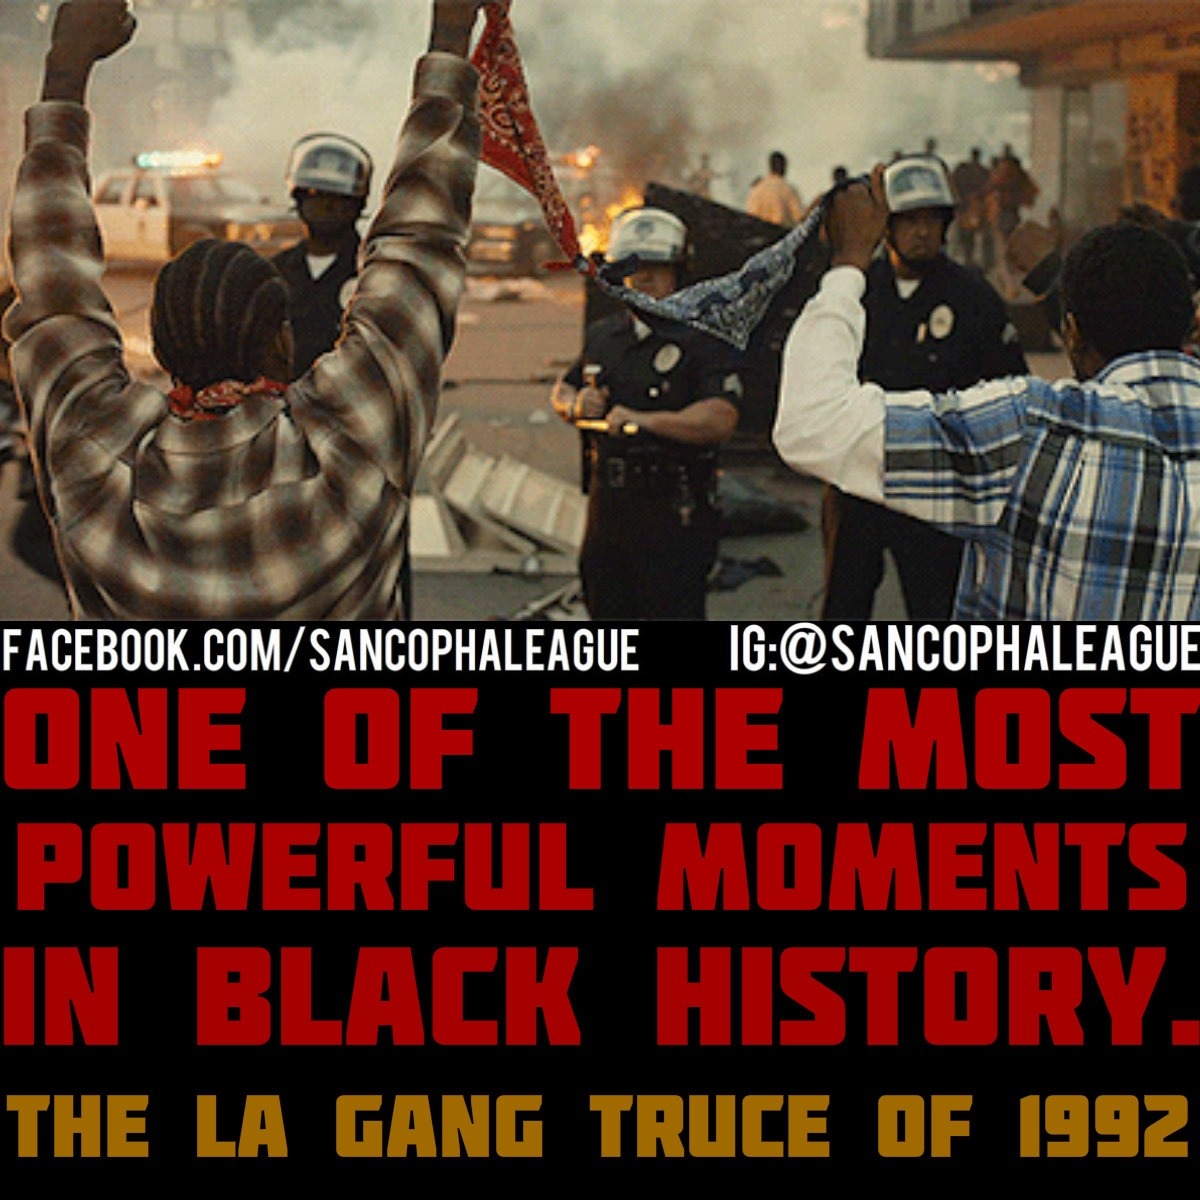 sancophaleague:  In 1992, after the Rodney King beating, OGs from the Crips and Bloods